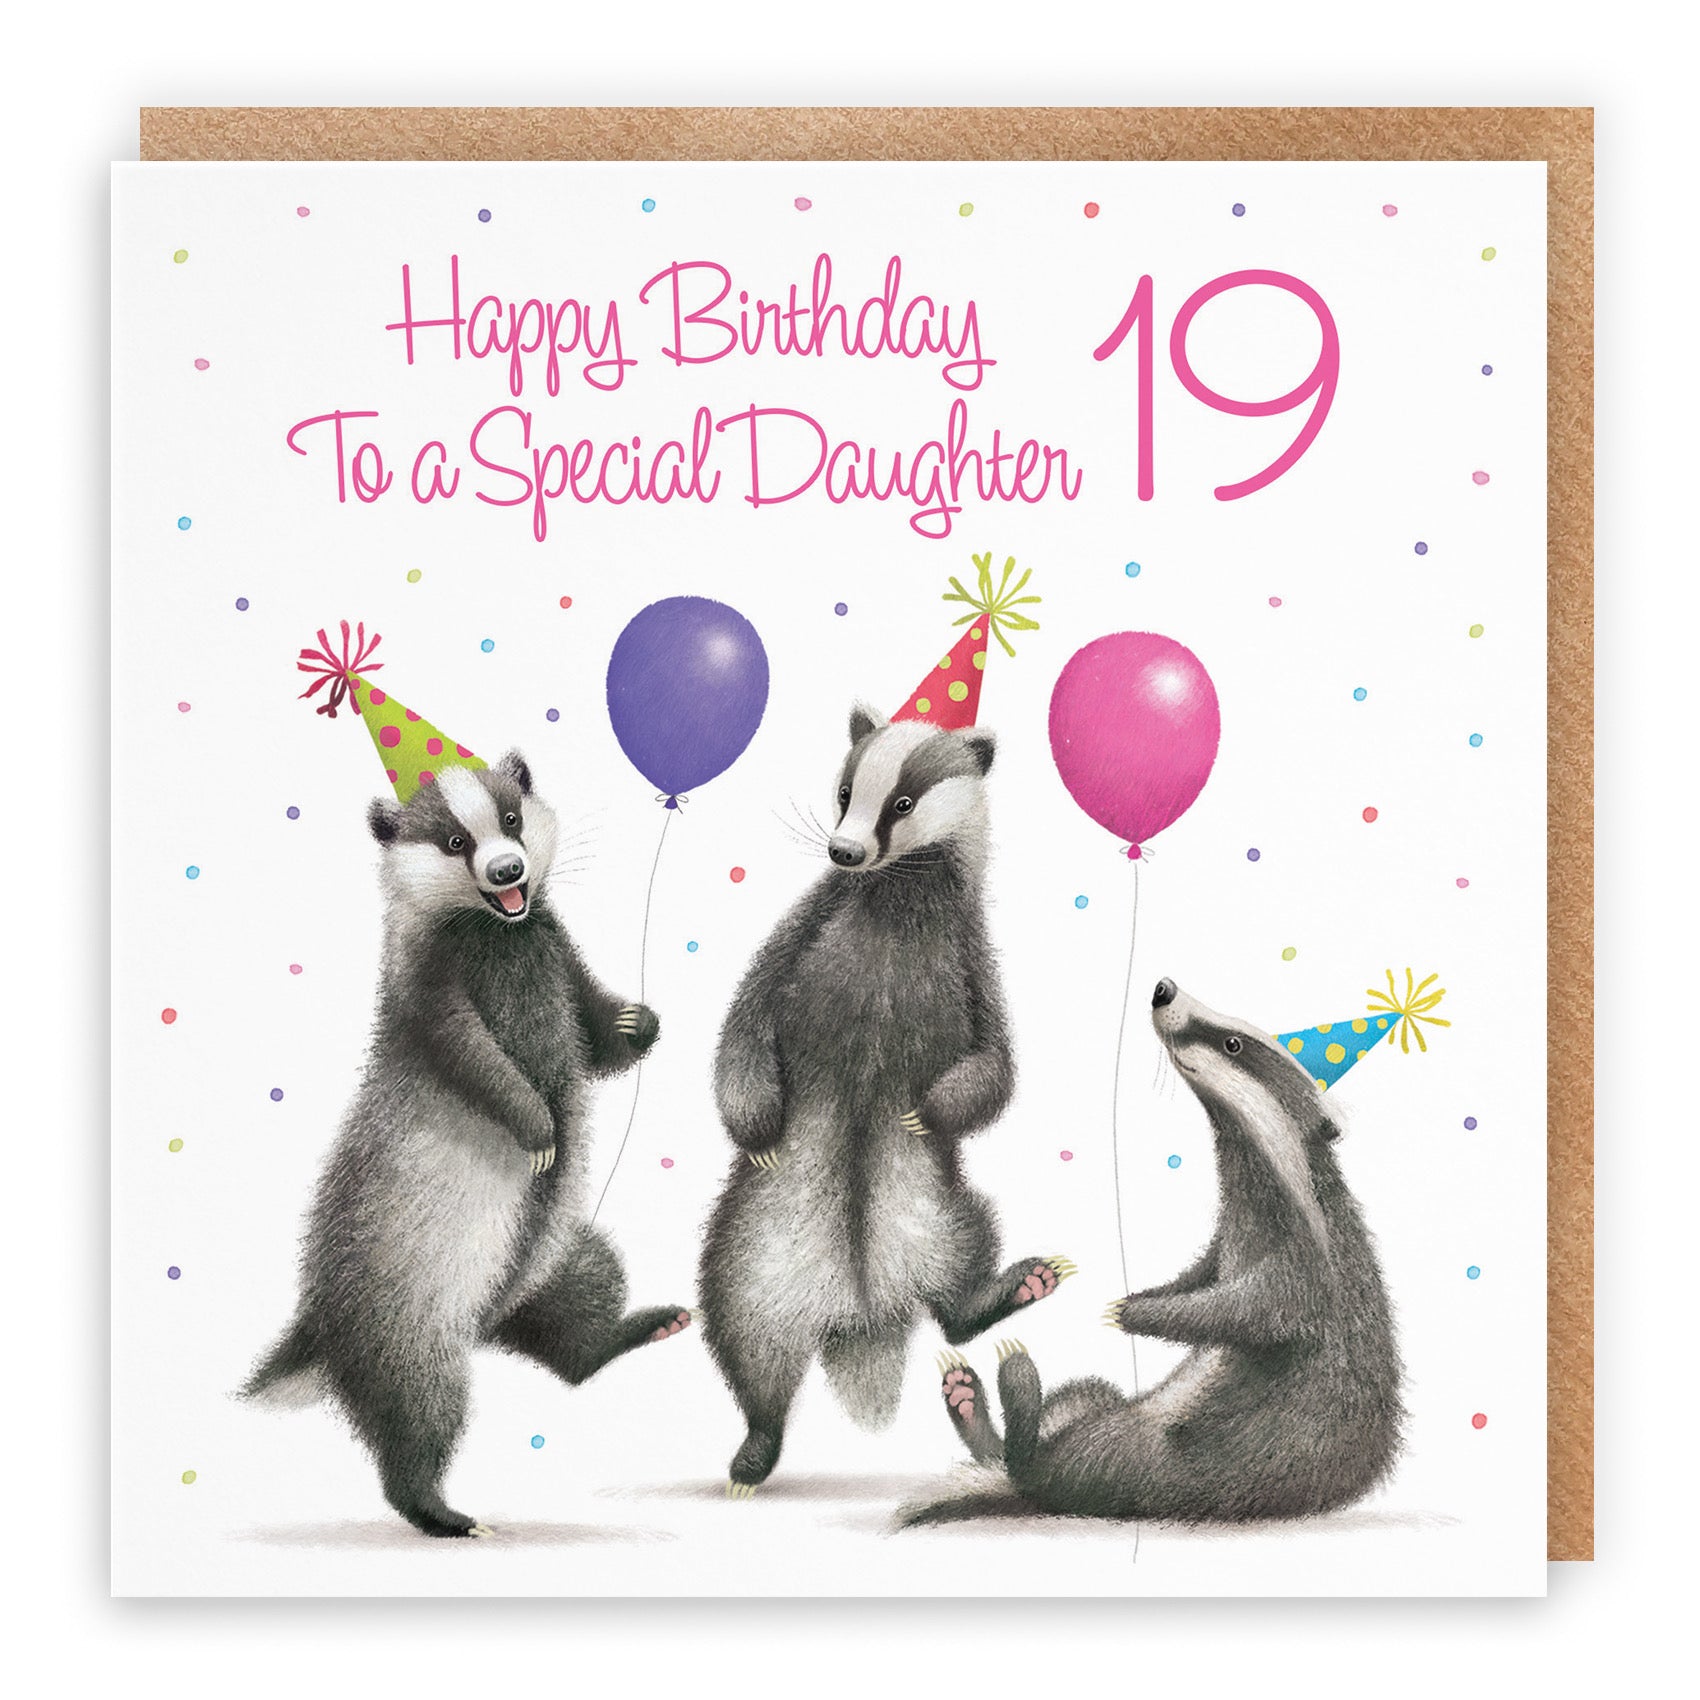 19th Daughter Badgers Birthday Card Milo's Gallery - Default Title (B0CRXV91SG)